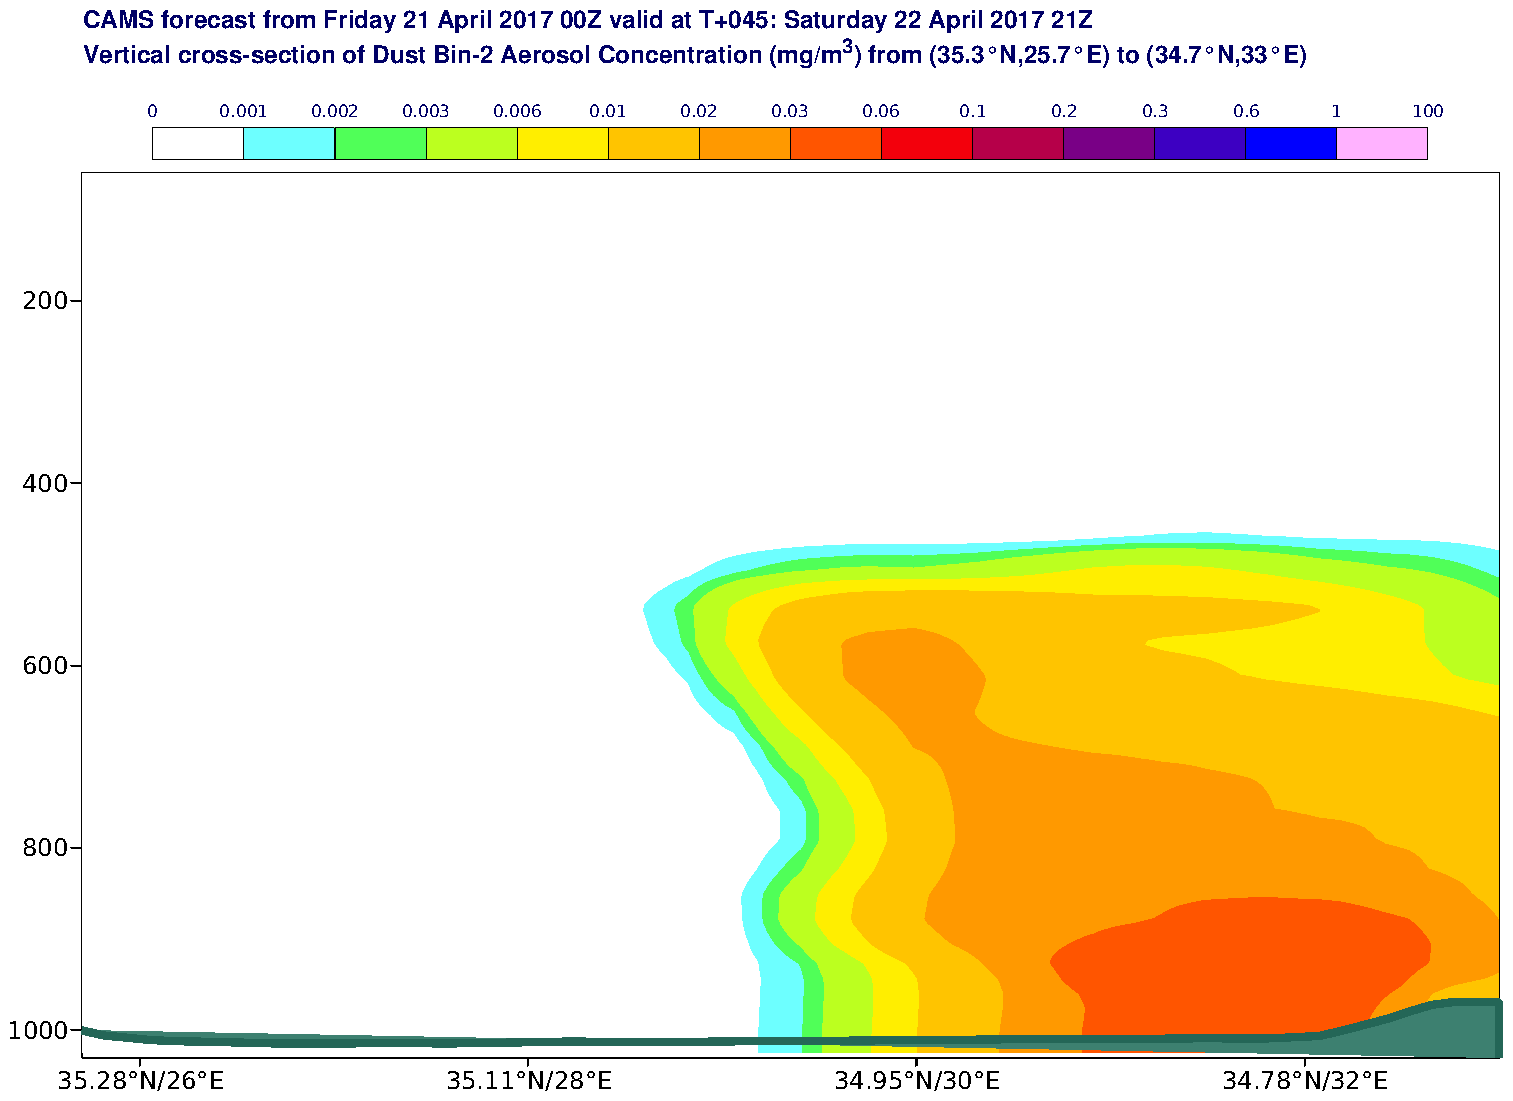 Vertical cross-section of Dust Bin-2 Aerosol Concentration (mg/m3) valid at T45 - 2017-04-22 21:00